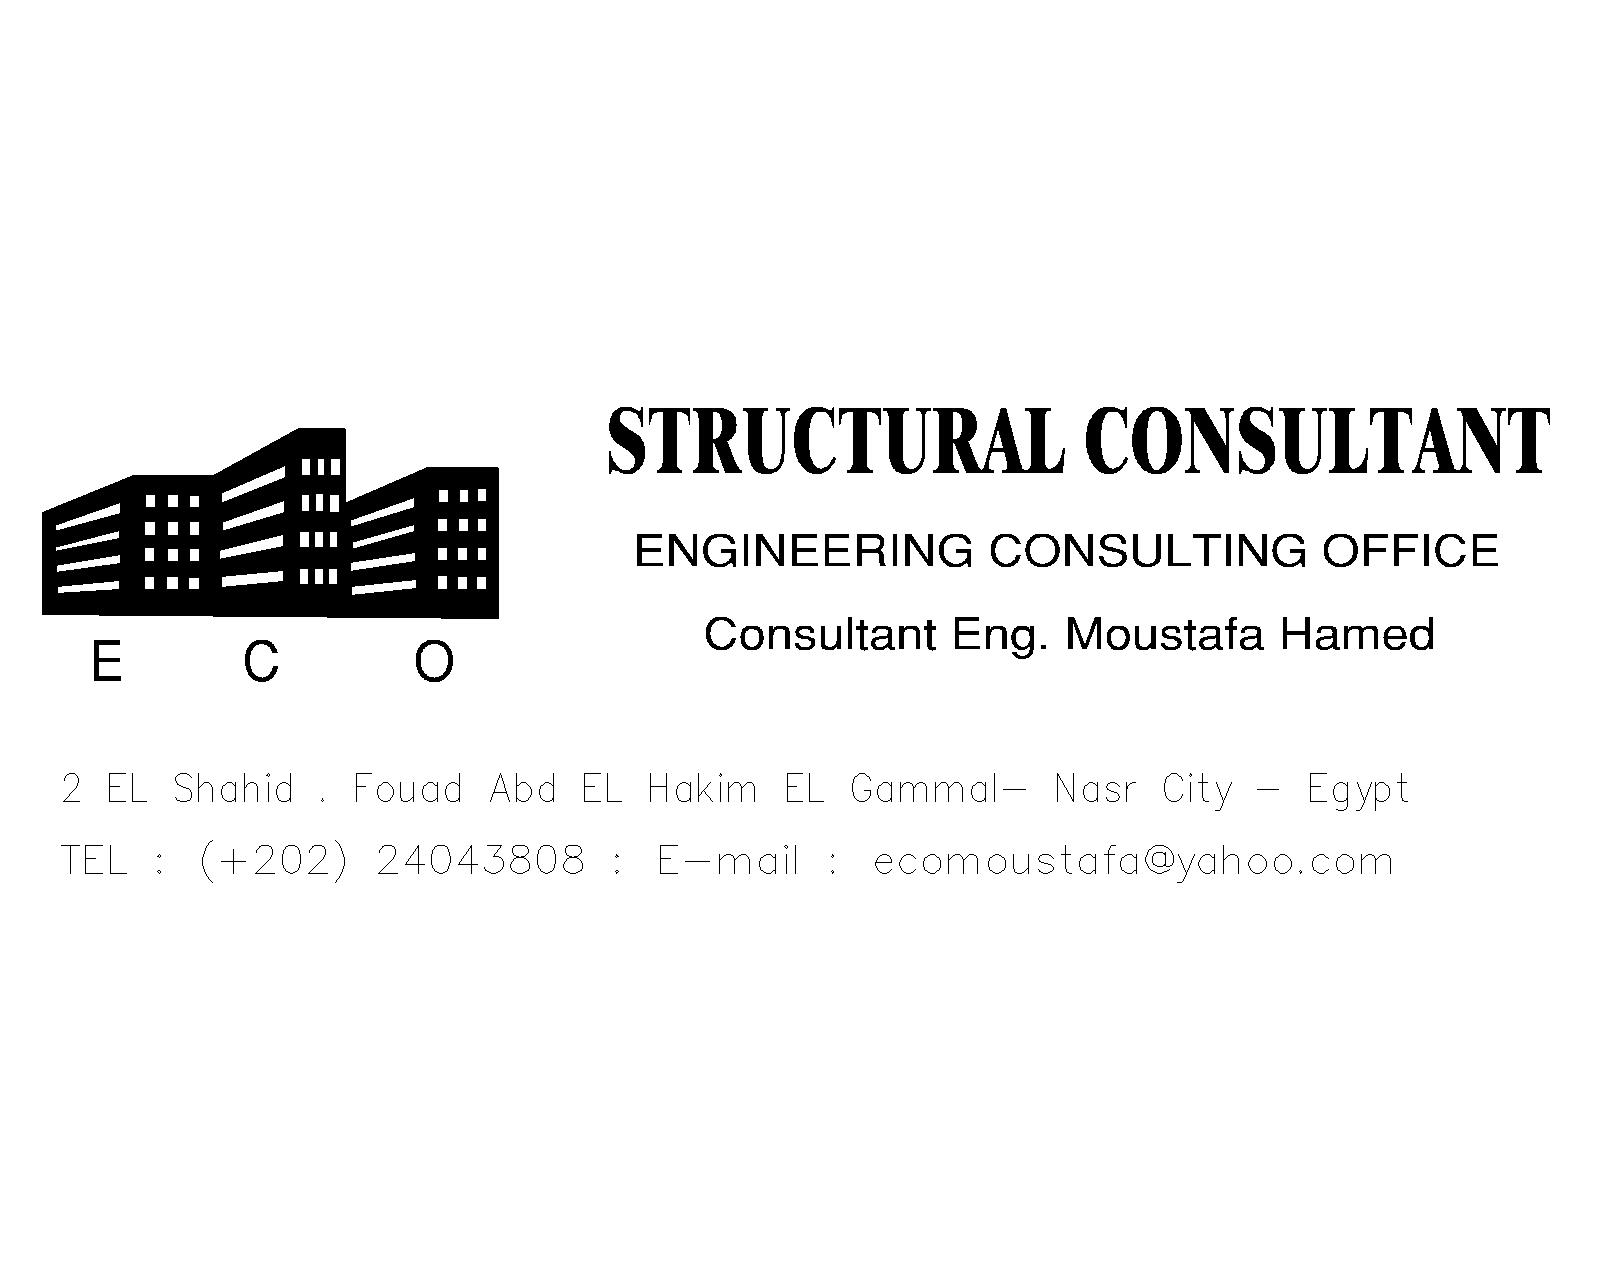 Engineering Consulting Office